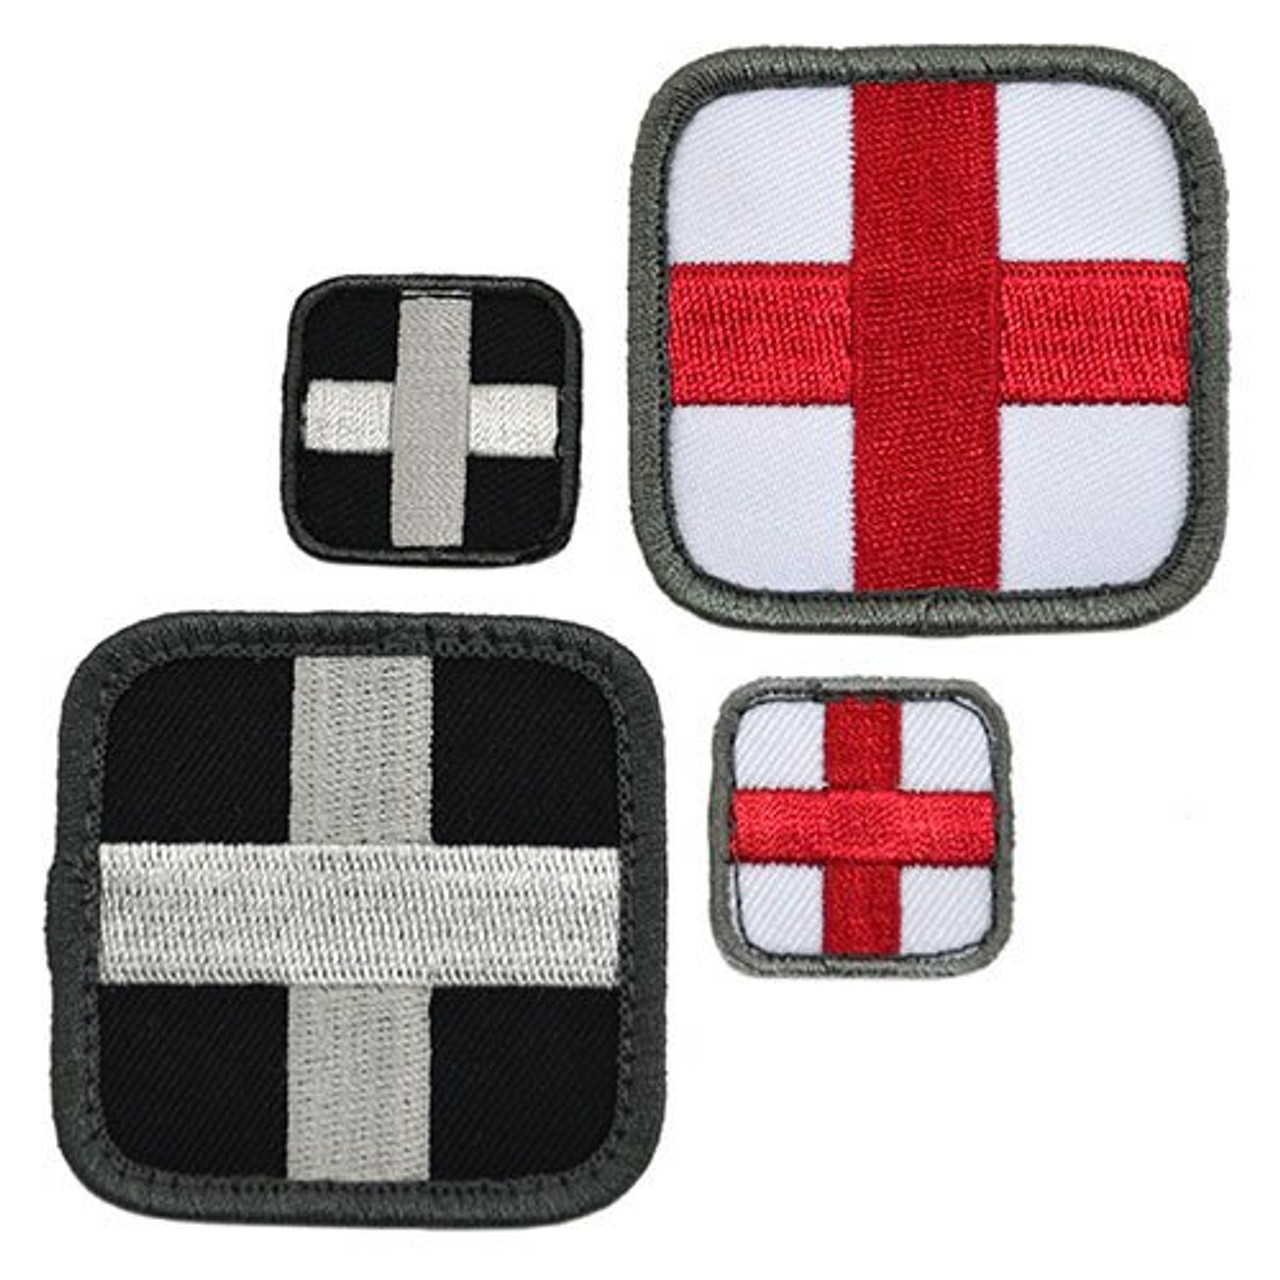 Velcro Back Patches, Decorative Patches for Clothes